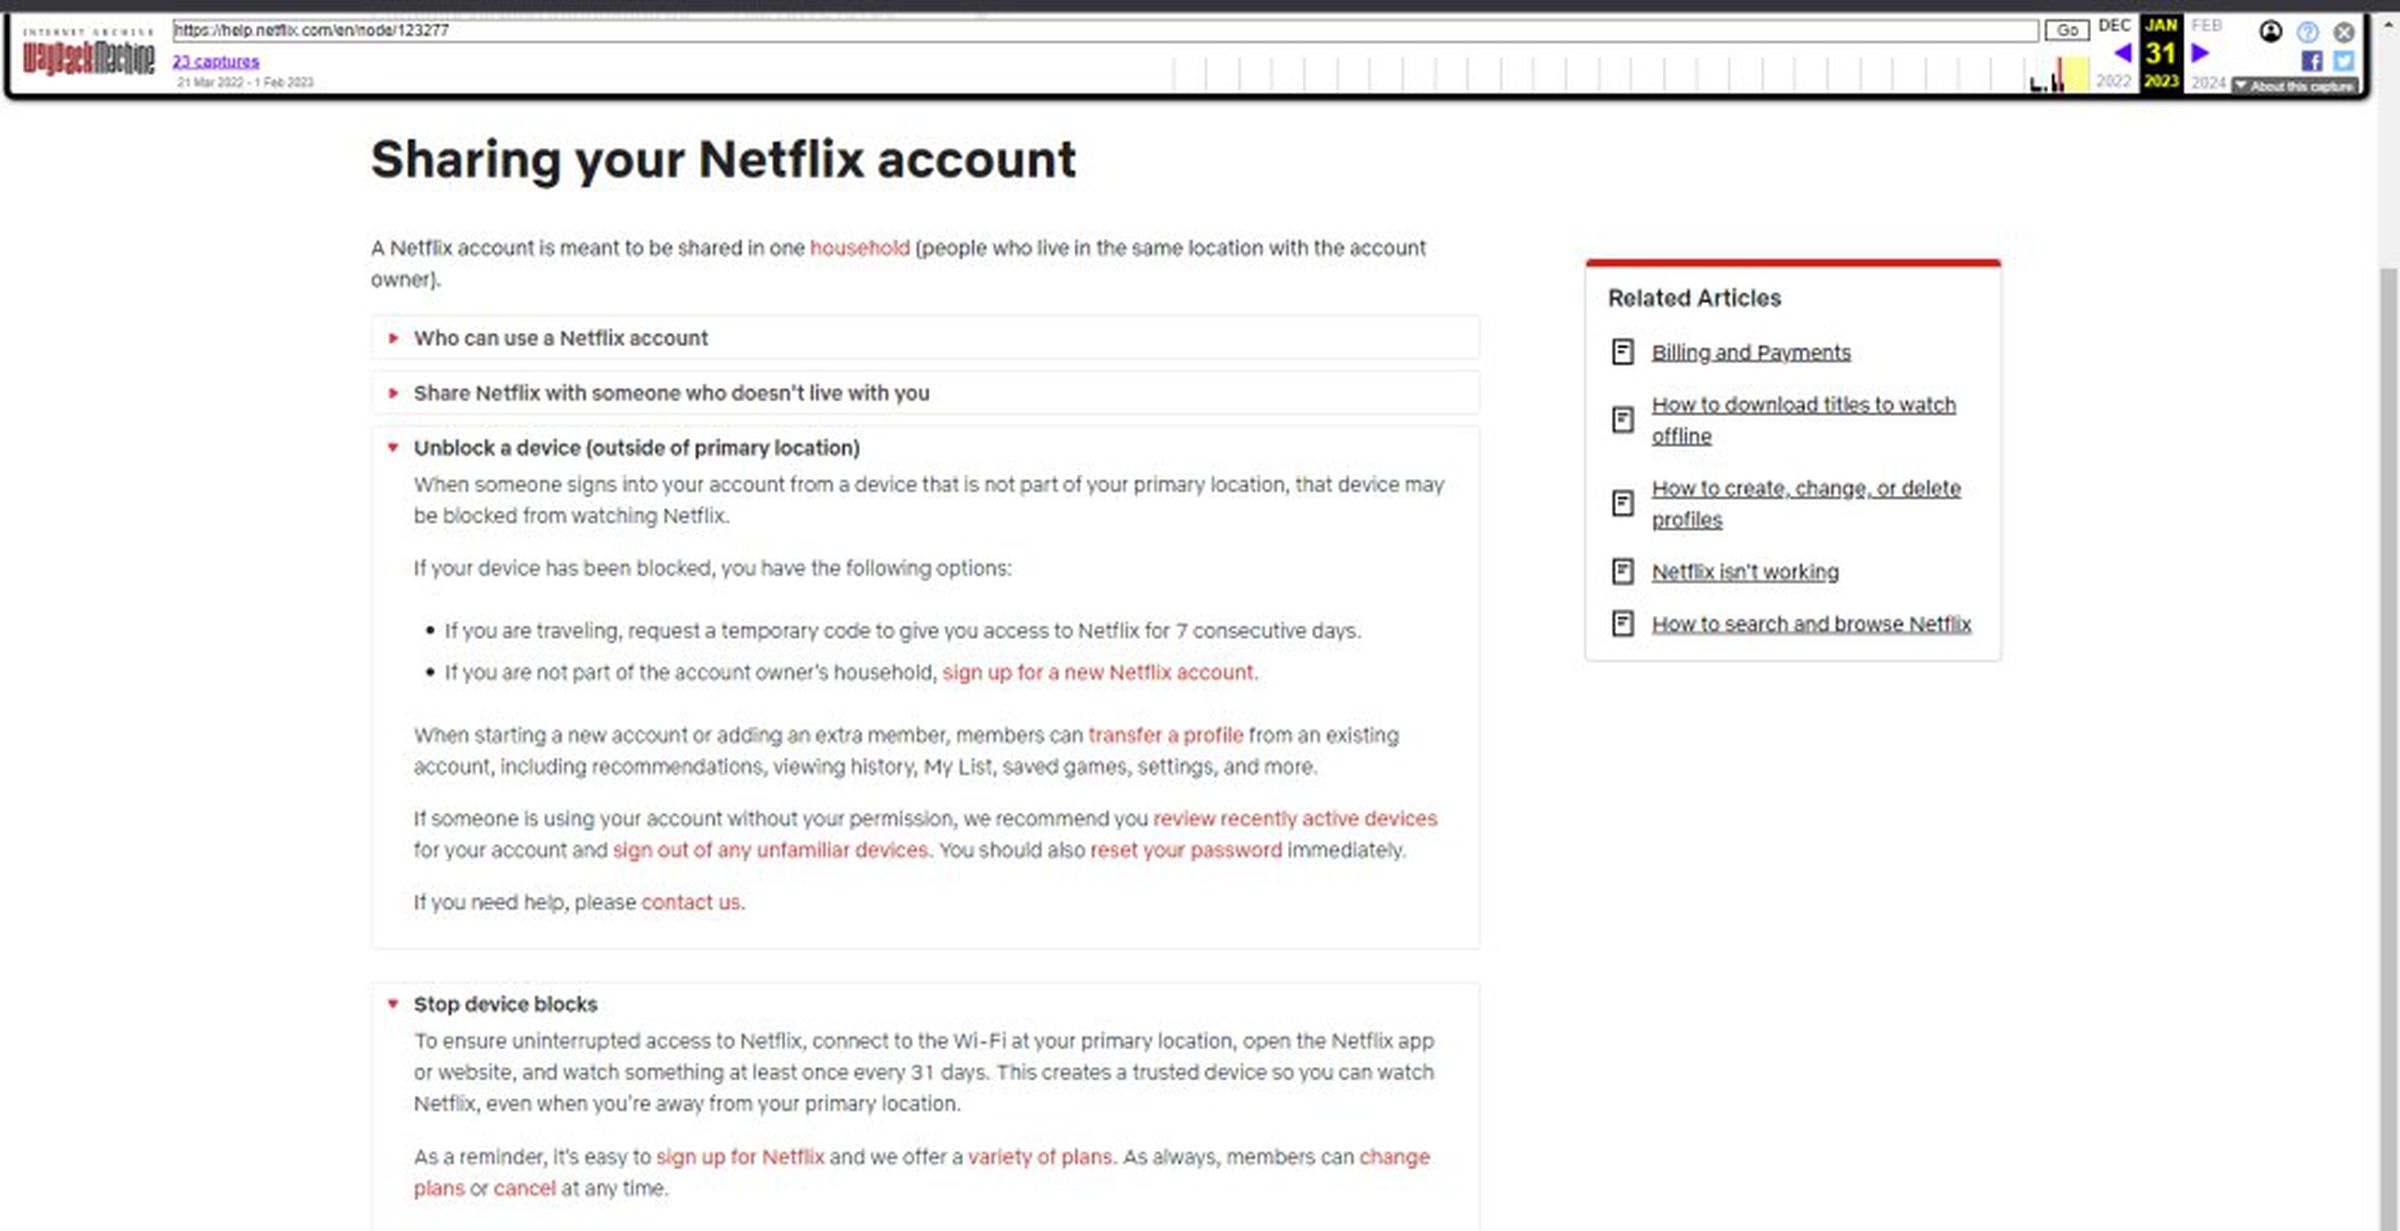 An archived support page states that Netflix may block devices that are 